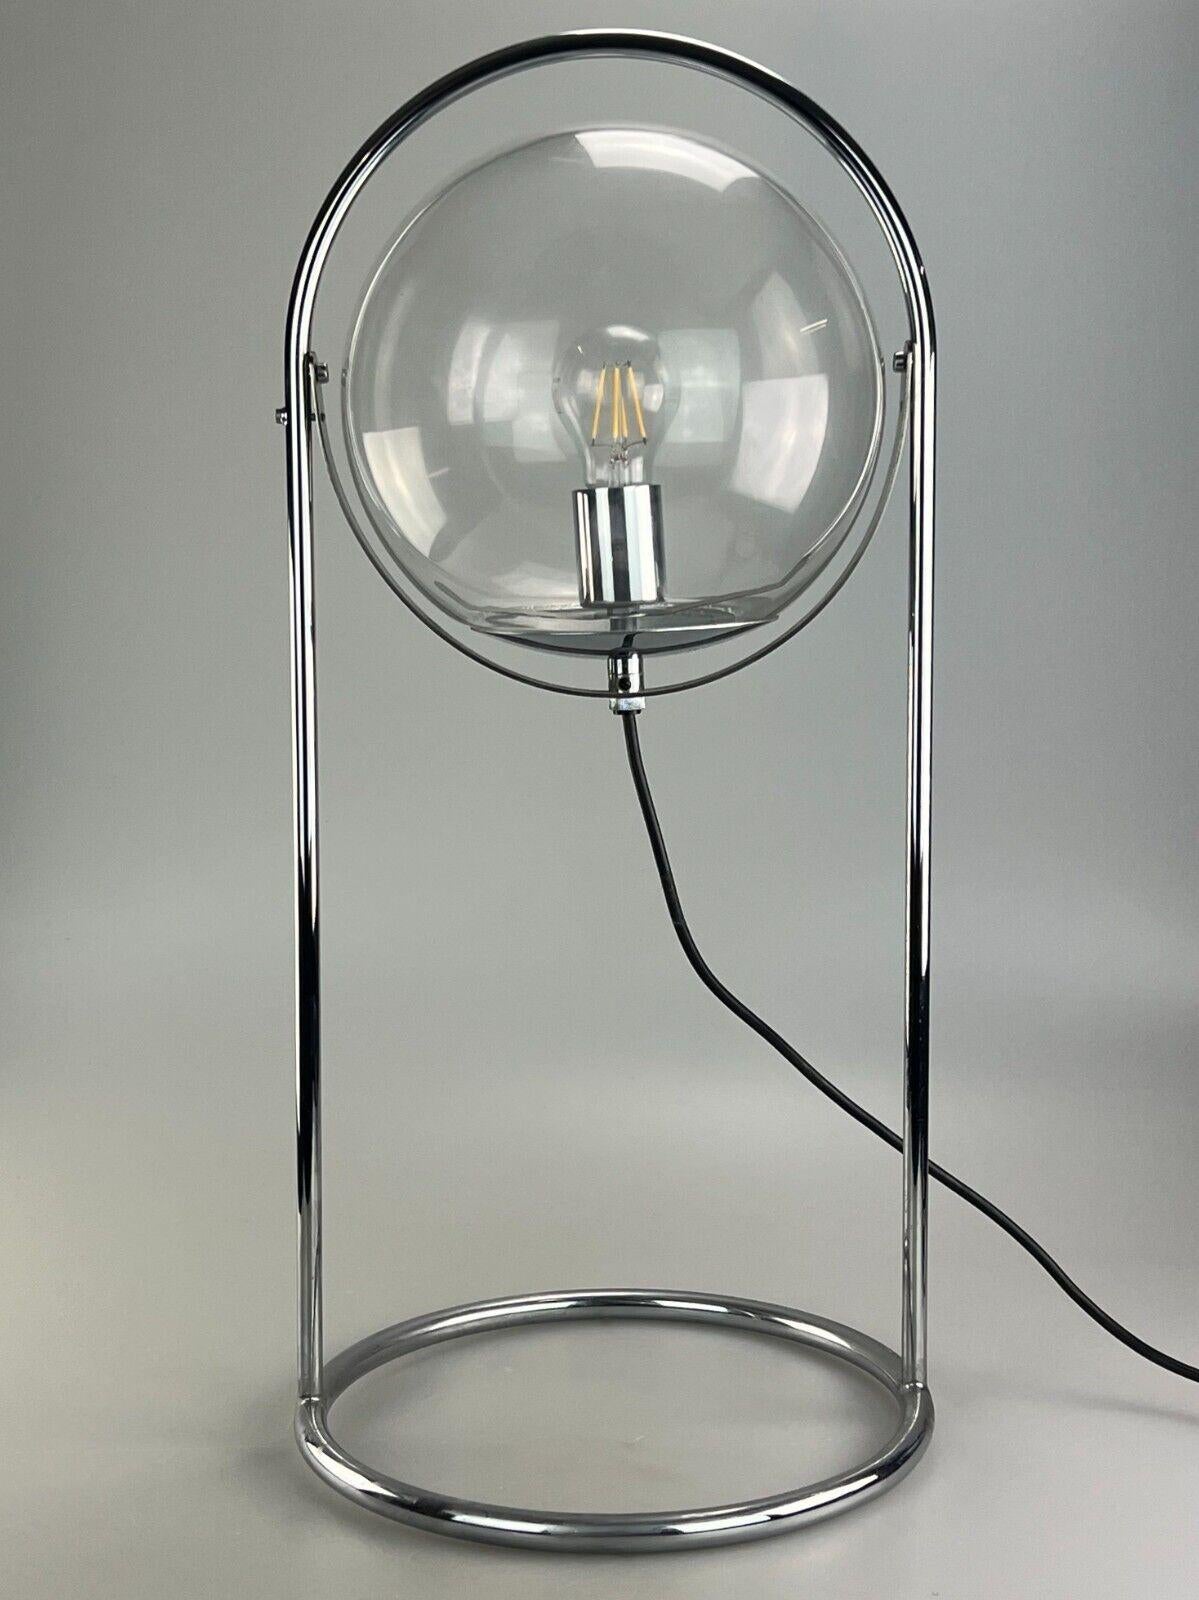 60s 70s ball lamp lamp light table lamp space age design glass metal

Object: spherical lamp

Manufacturer:

Condition: good

Age: around 1960-1970

Dimensions:

Diameter = 31cm
Height = 66cm

Other notes:

E27 socket

The